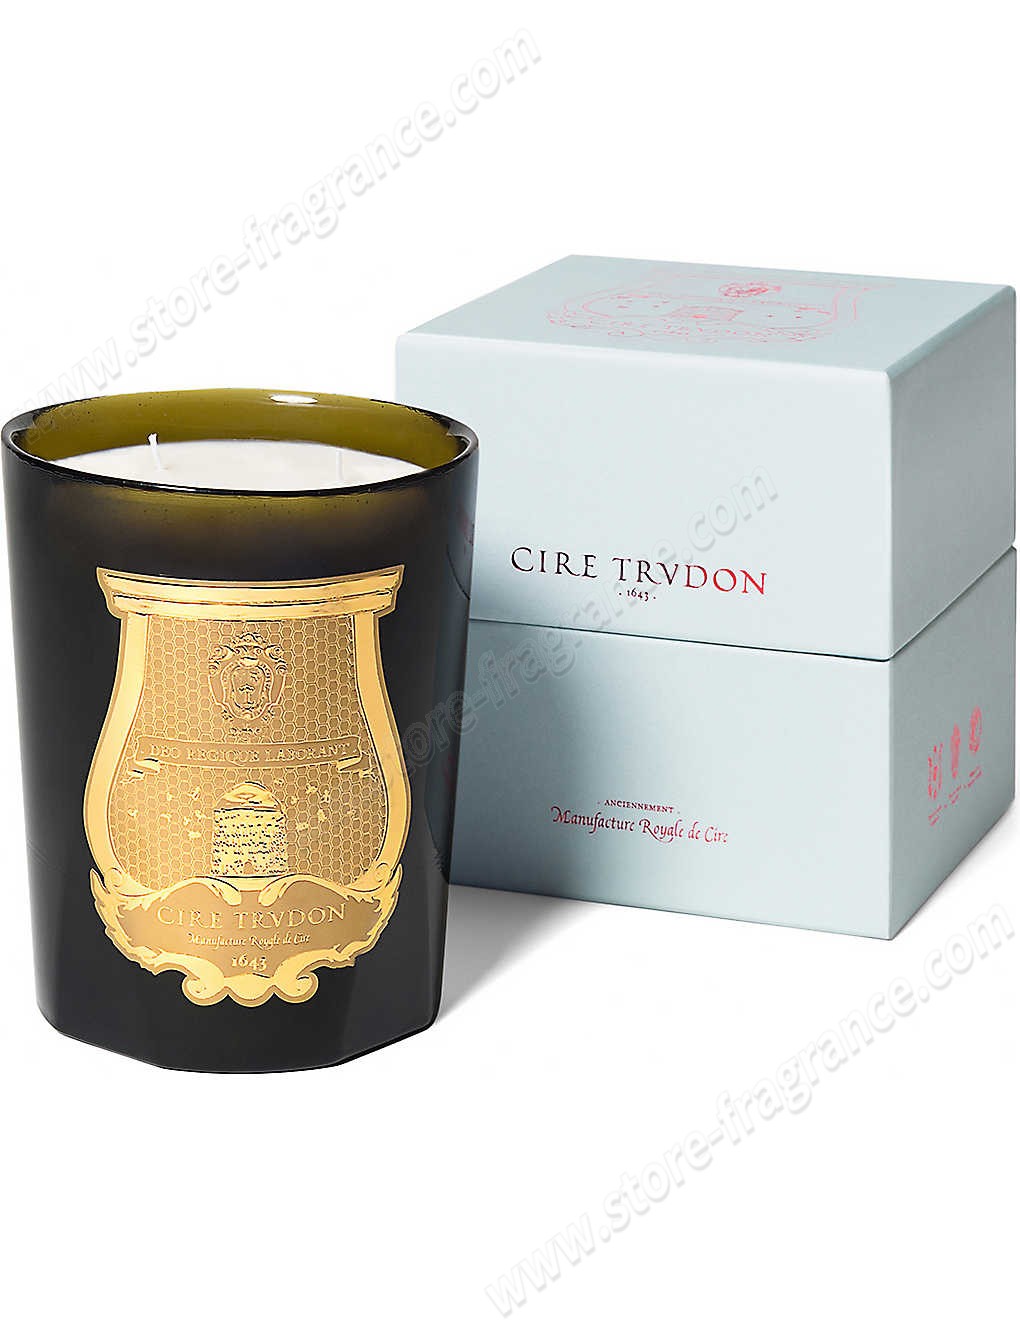 CIRE TRUDON/Abd El Kader scented candle 800g ✿ Discount Store - CIRE TRUDON/Abd El Kader scented candle 800g ✿ Discount Store